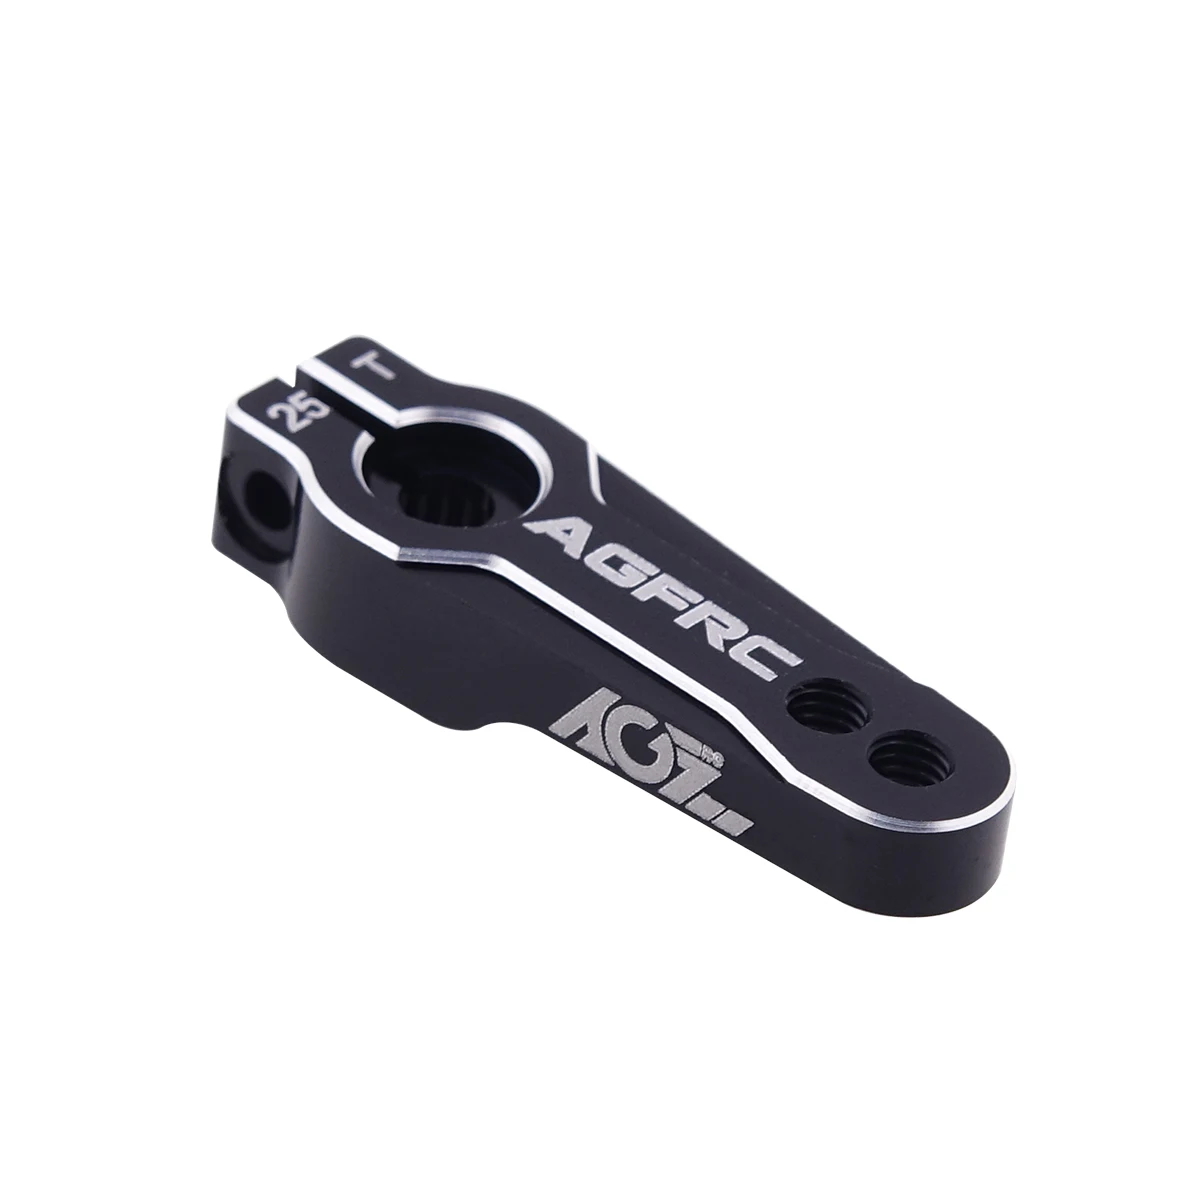 AGFRC HSS16AG Aluminum Alloy 25T Spline M3 1/10 Clamping Steering Servo Arm Horn for RC Crawler Buggy Truggy Car Upgrade Parts